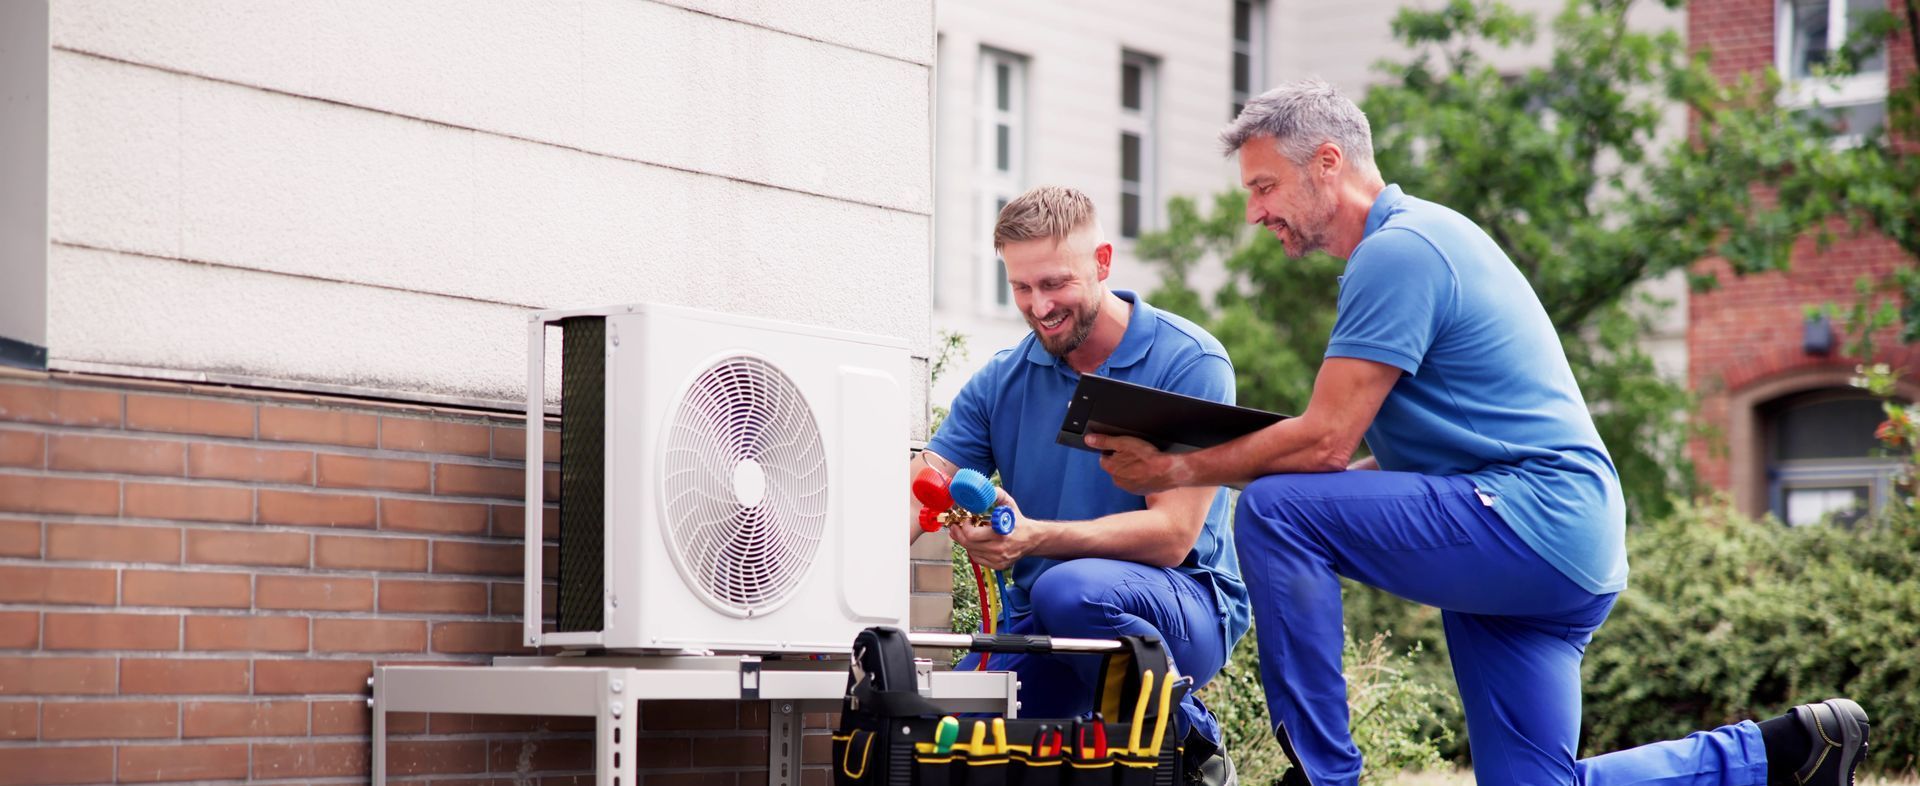 Two men are working on an air conditioner outside of a building.